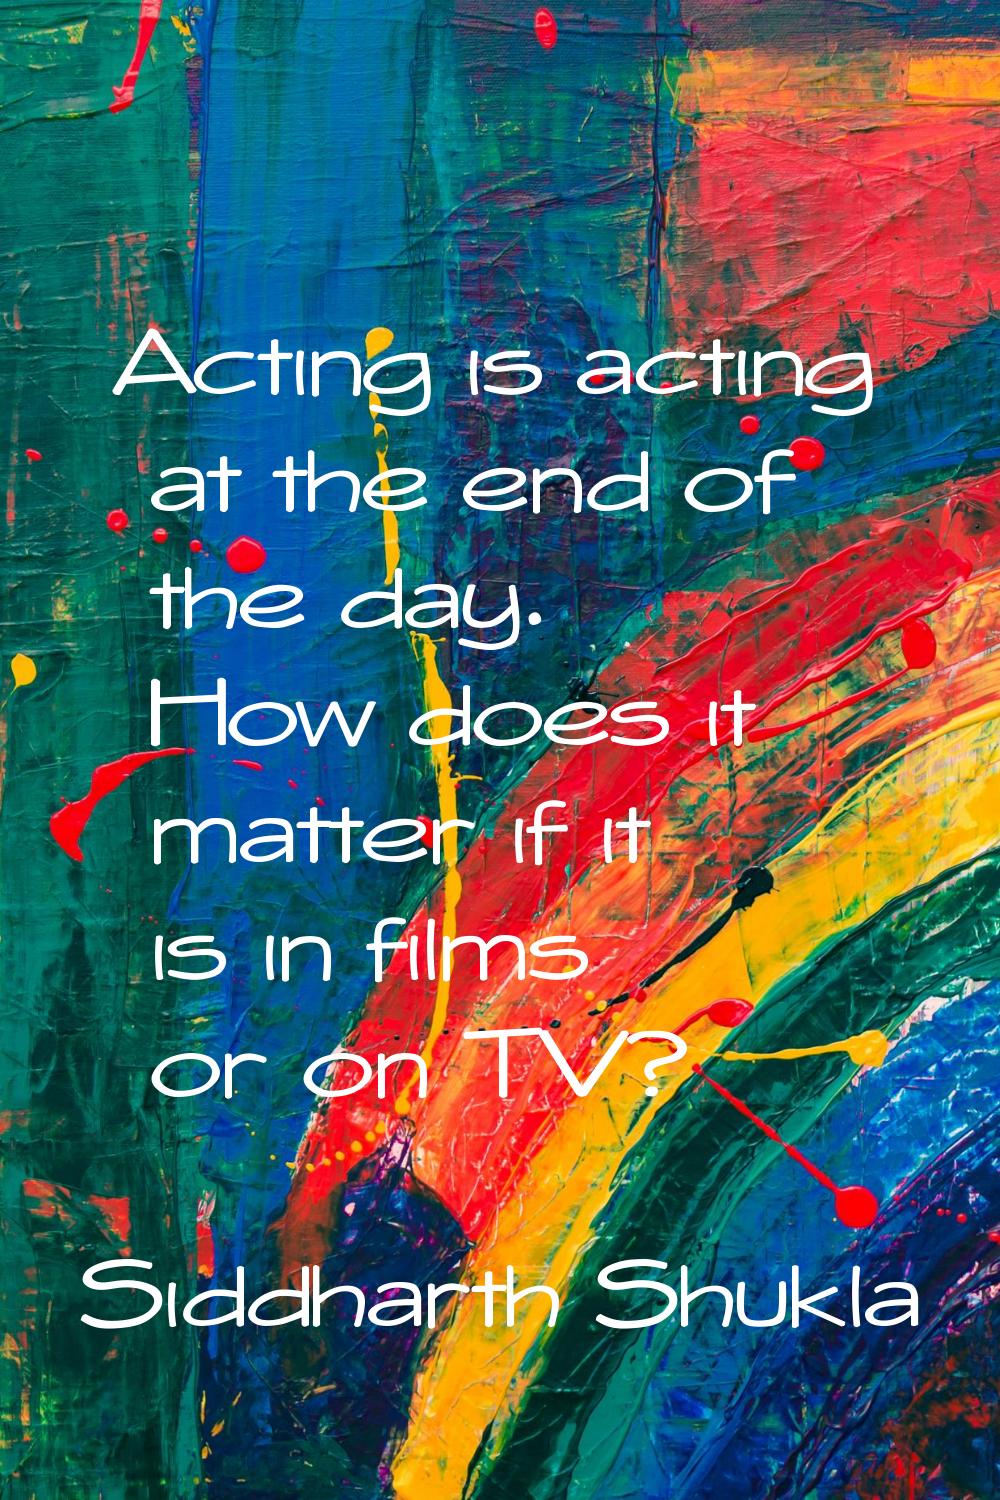 Acting is acting at the end of the day. How does it matter if it is in films or on TV?